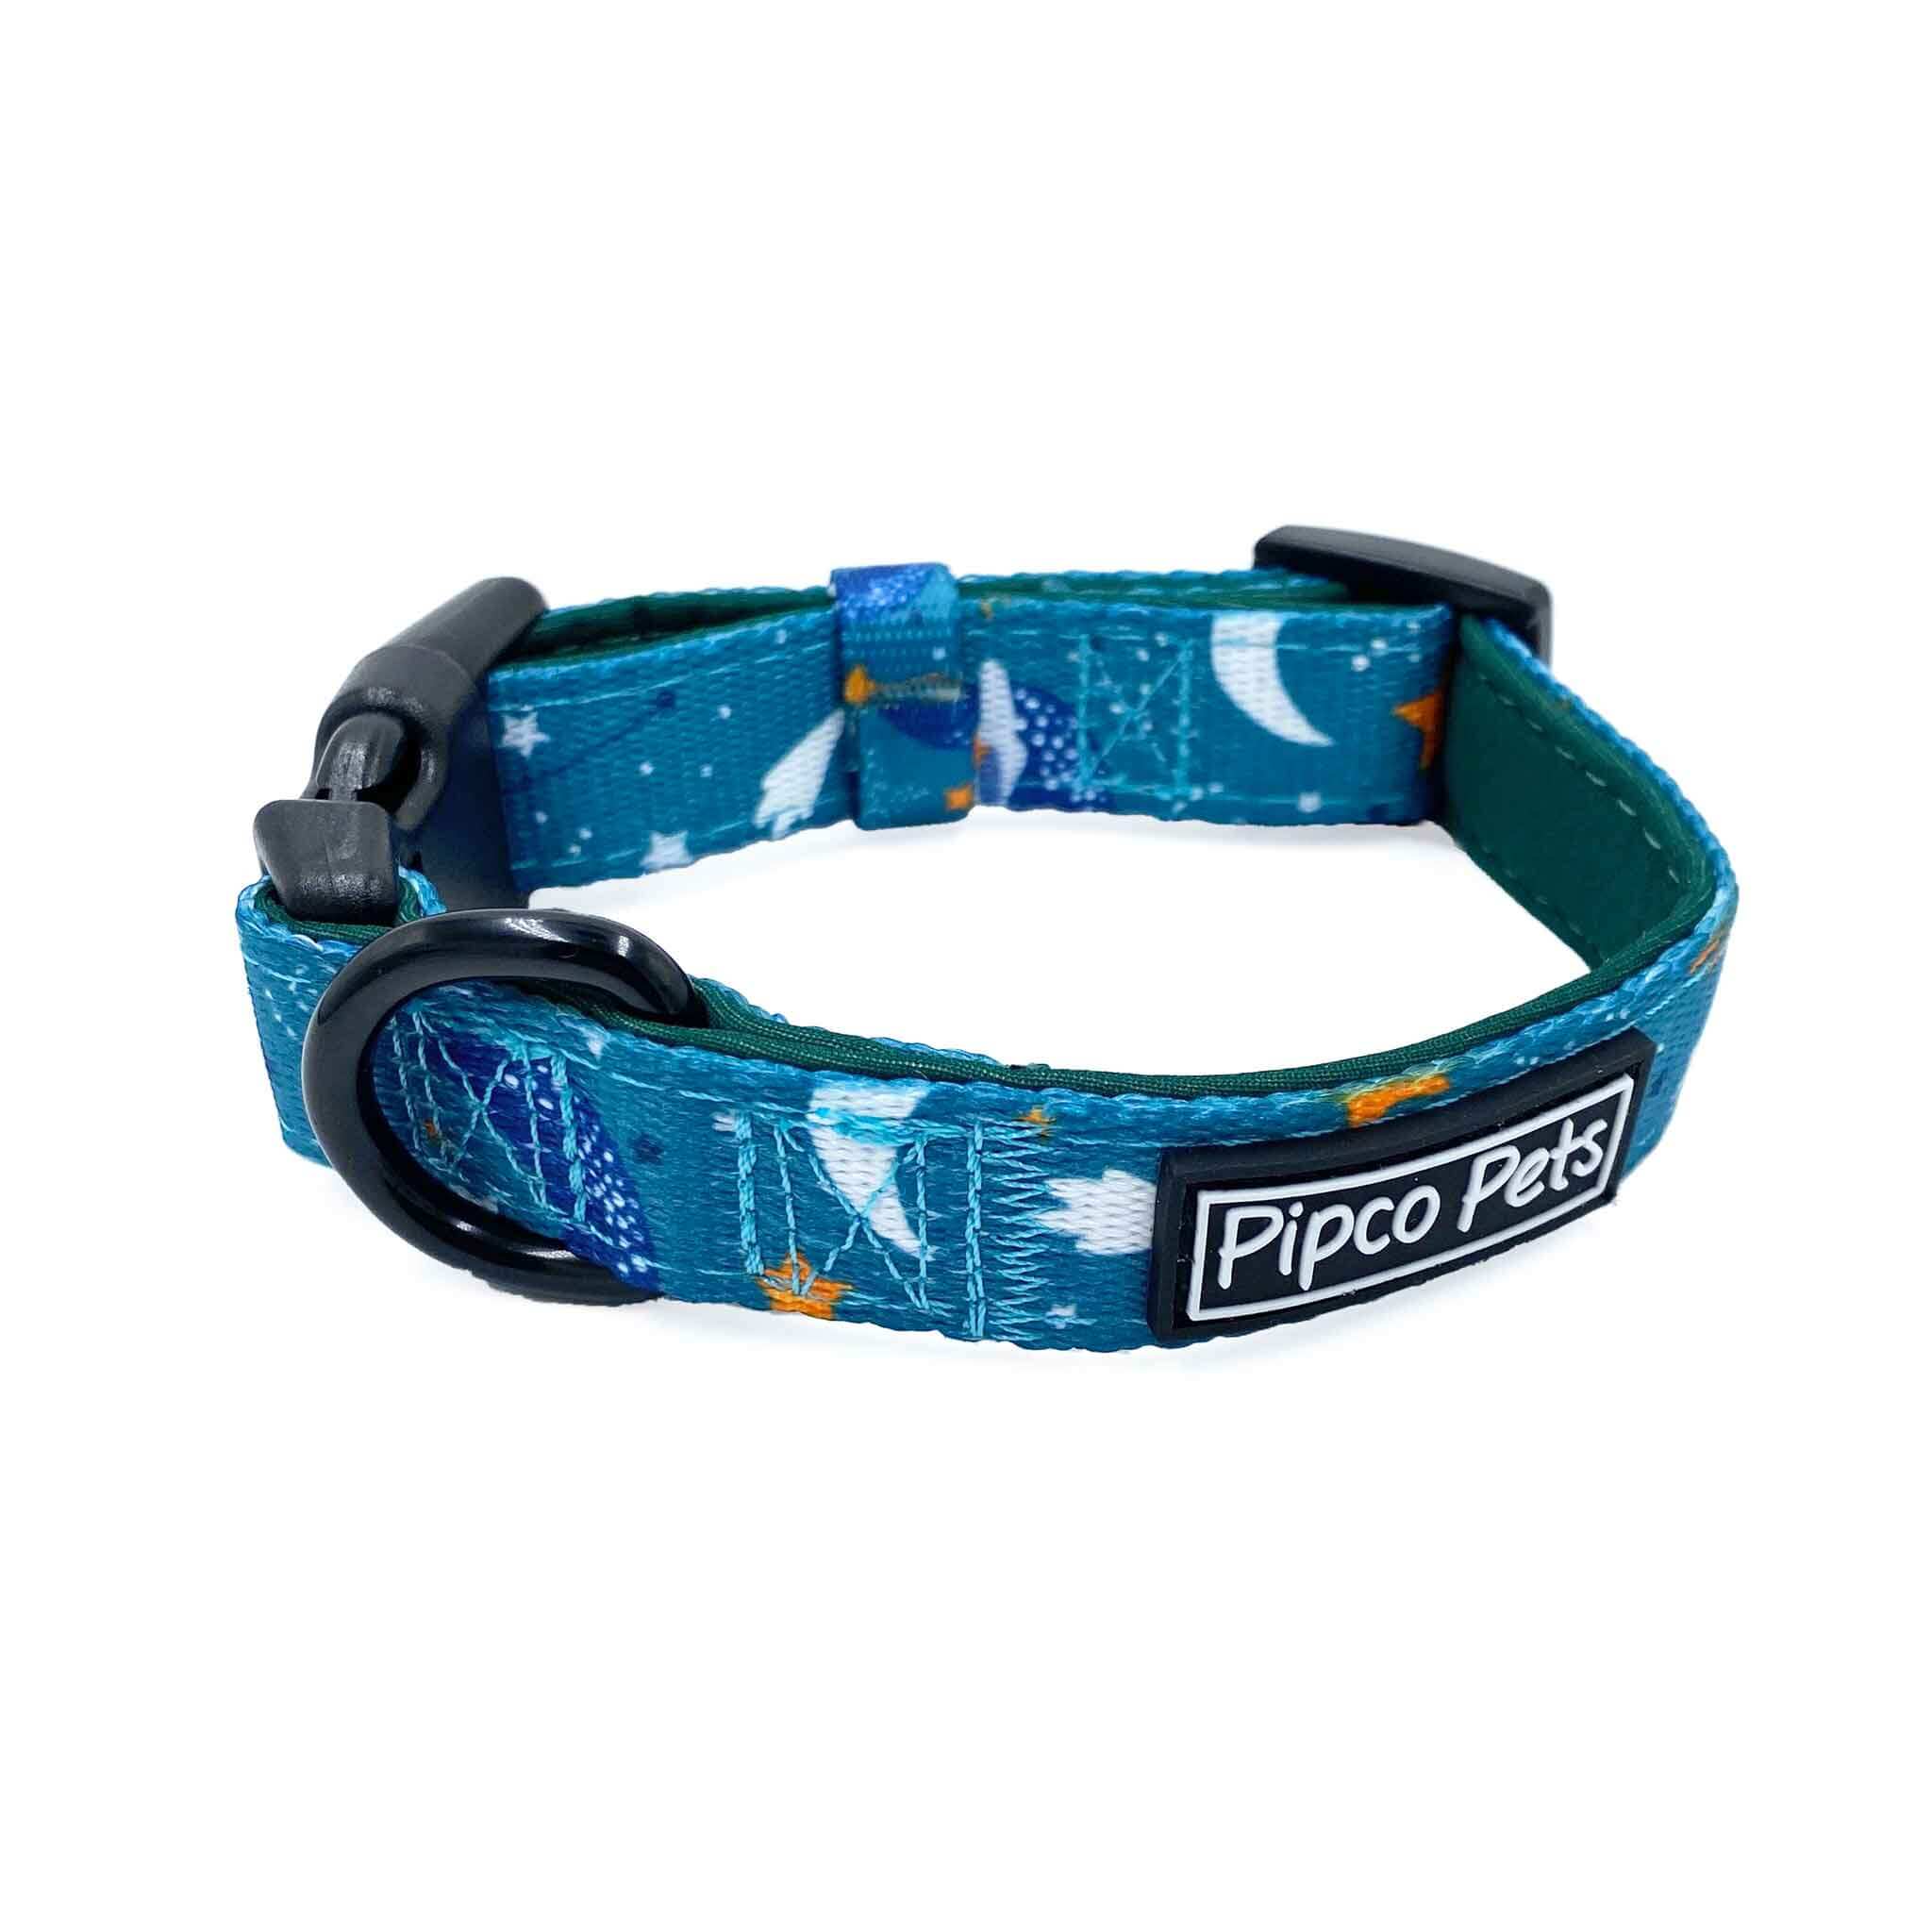 Pipco Pets dog collar with Starry Night outer space and stars print pattern in teal